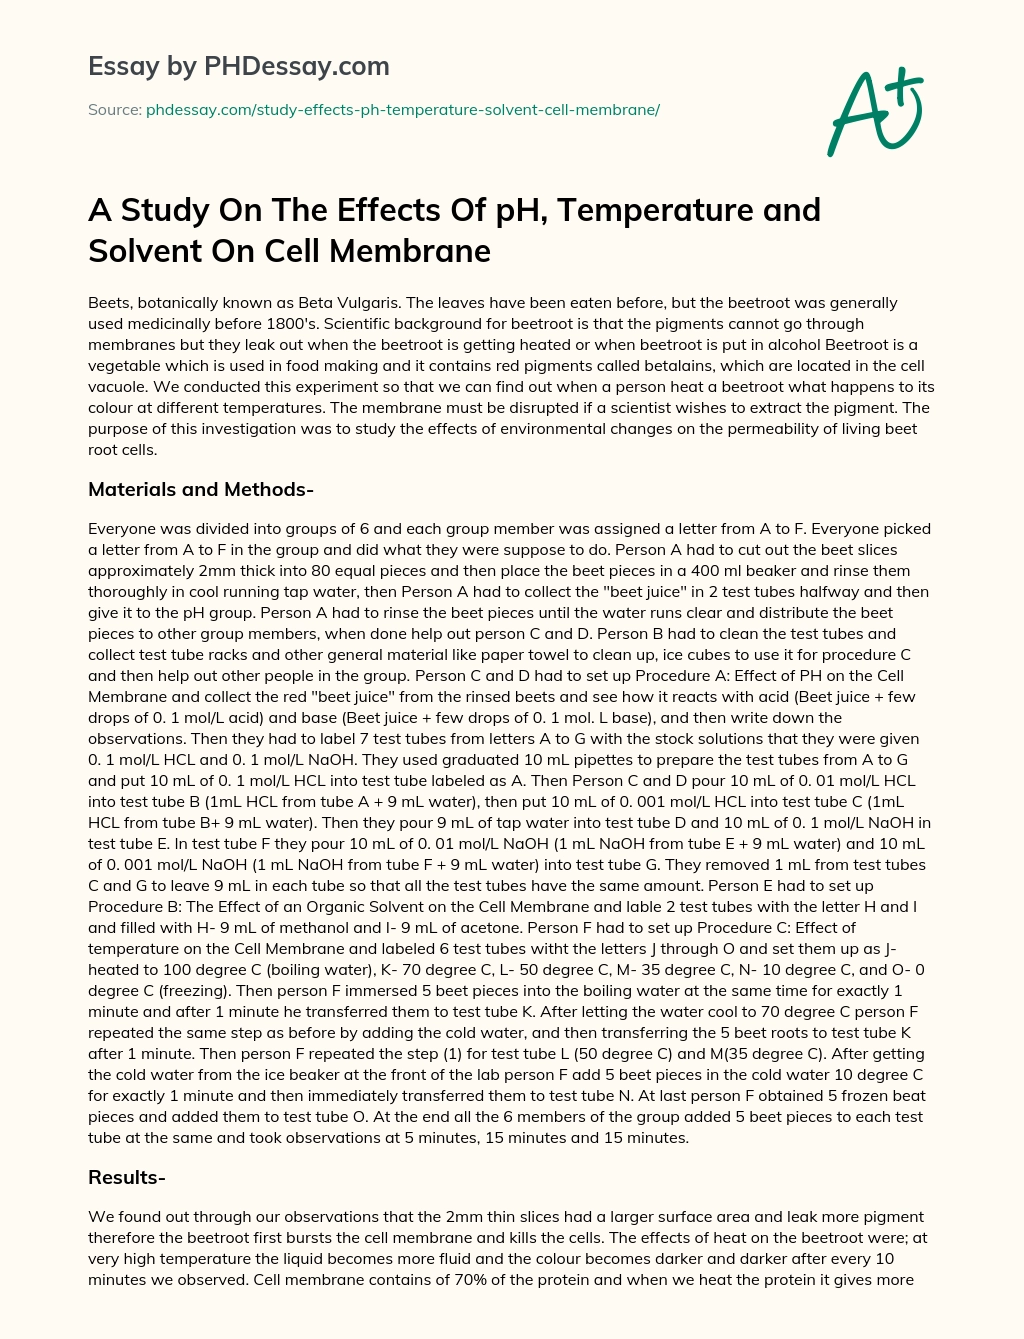 A Study On The Effects Of pH, Temperature and Solvent On Cell Membrane essay